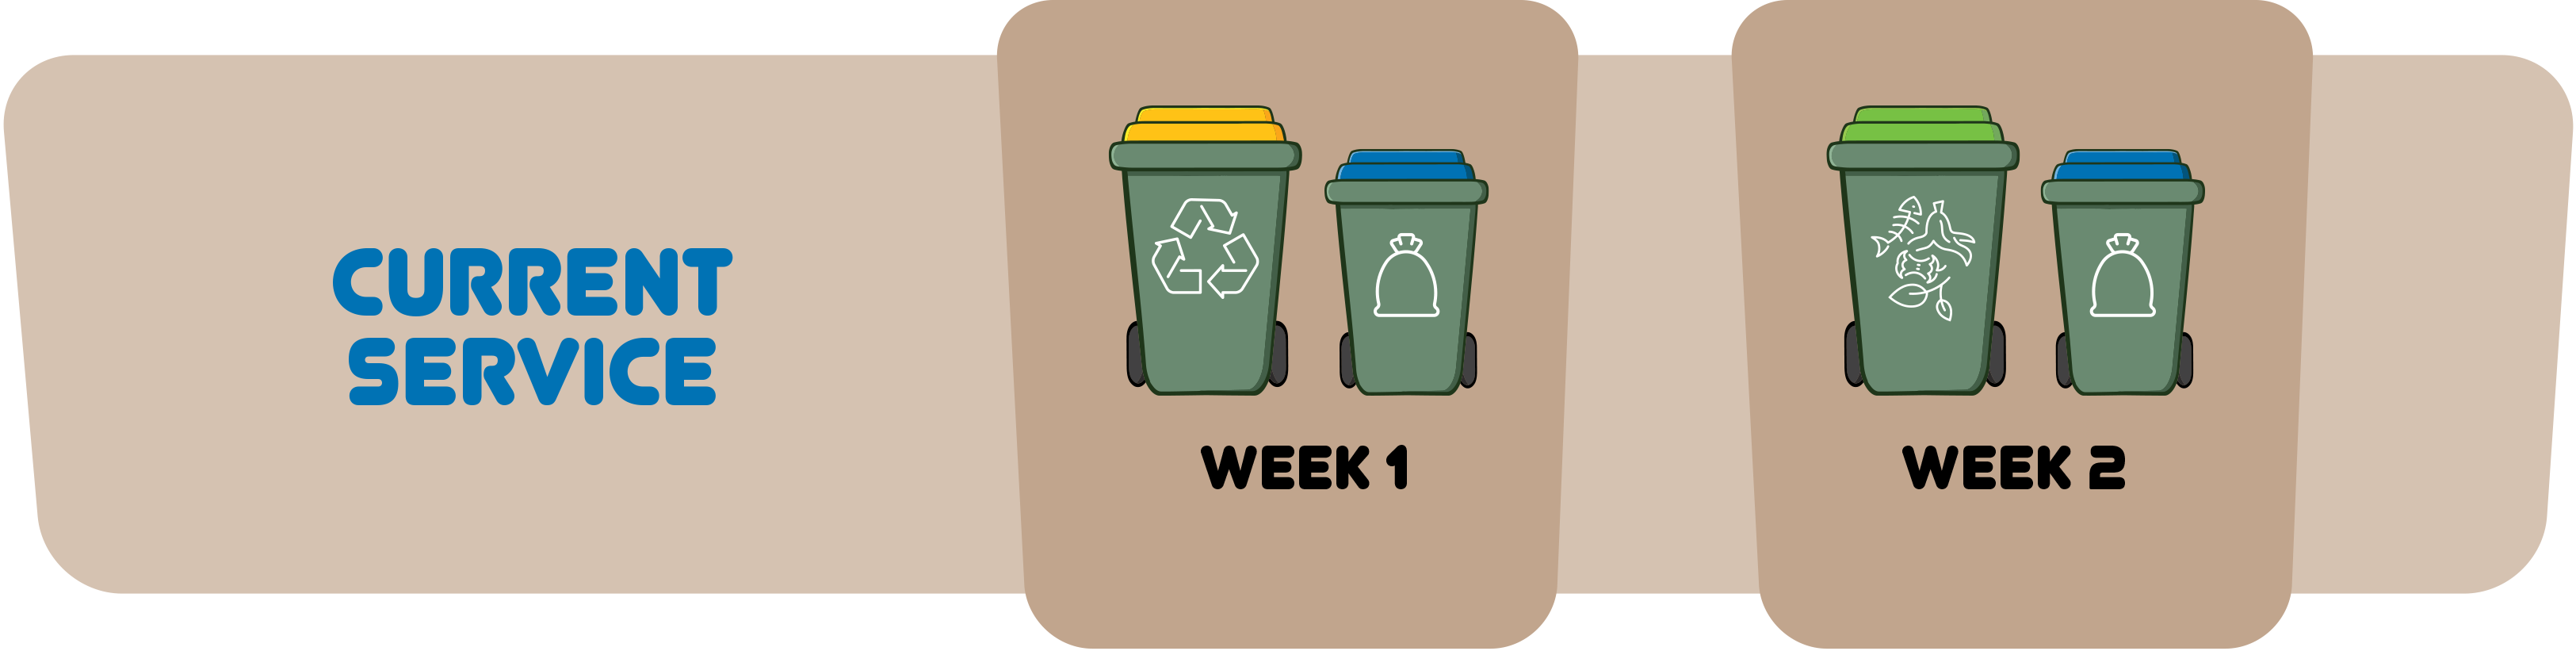 Current service for kerbside bin collection. Week 1 recycling and landfill. Week 2 FOGO and landfill.